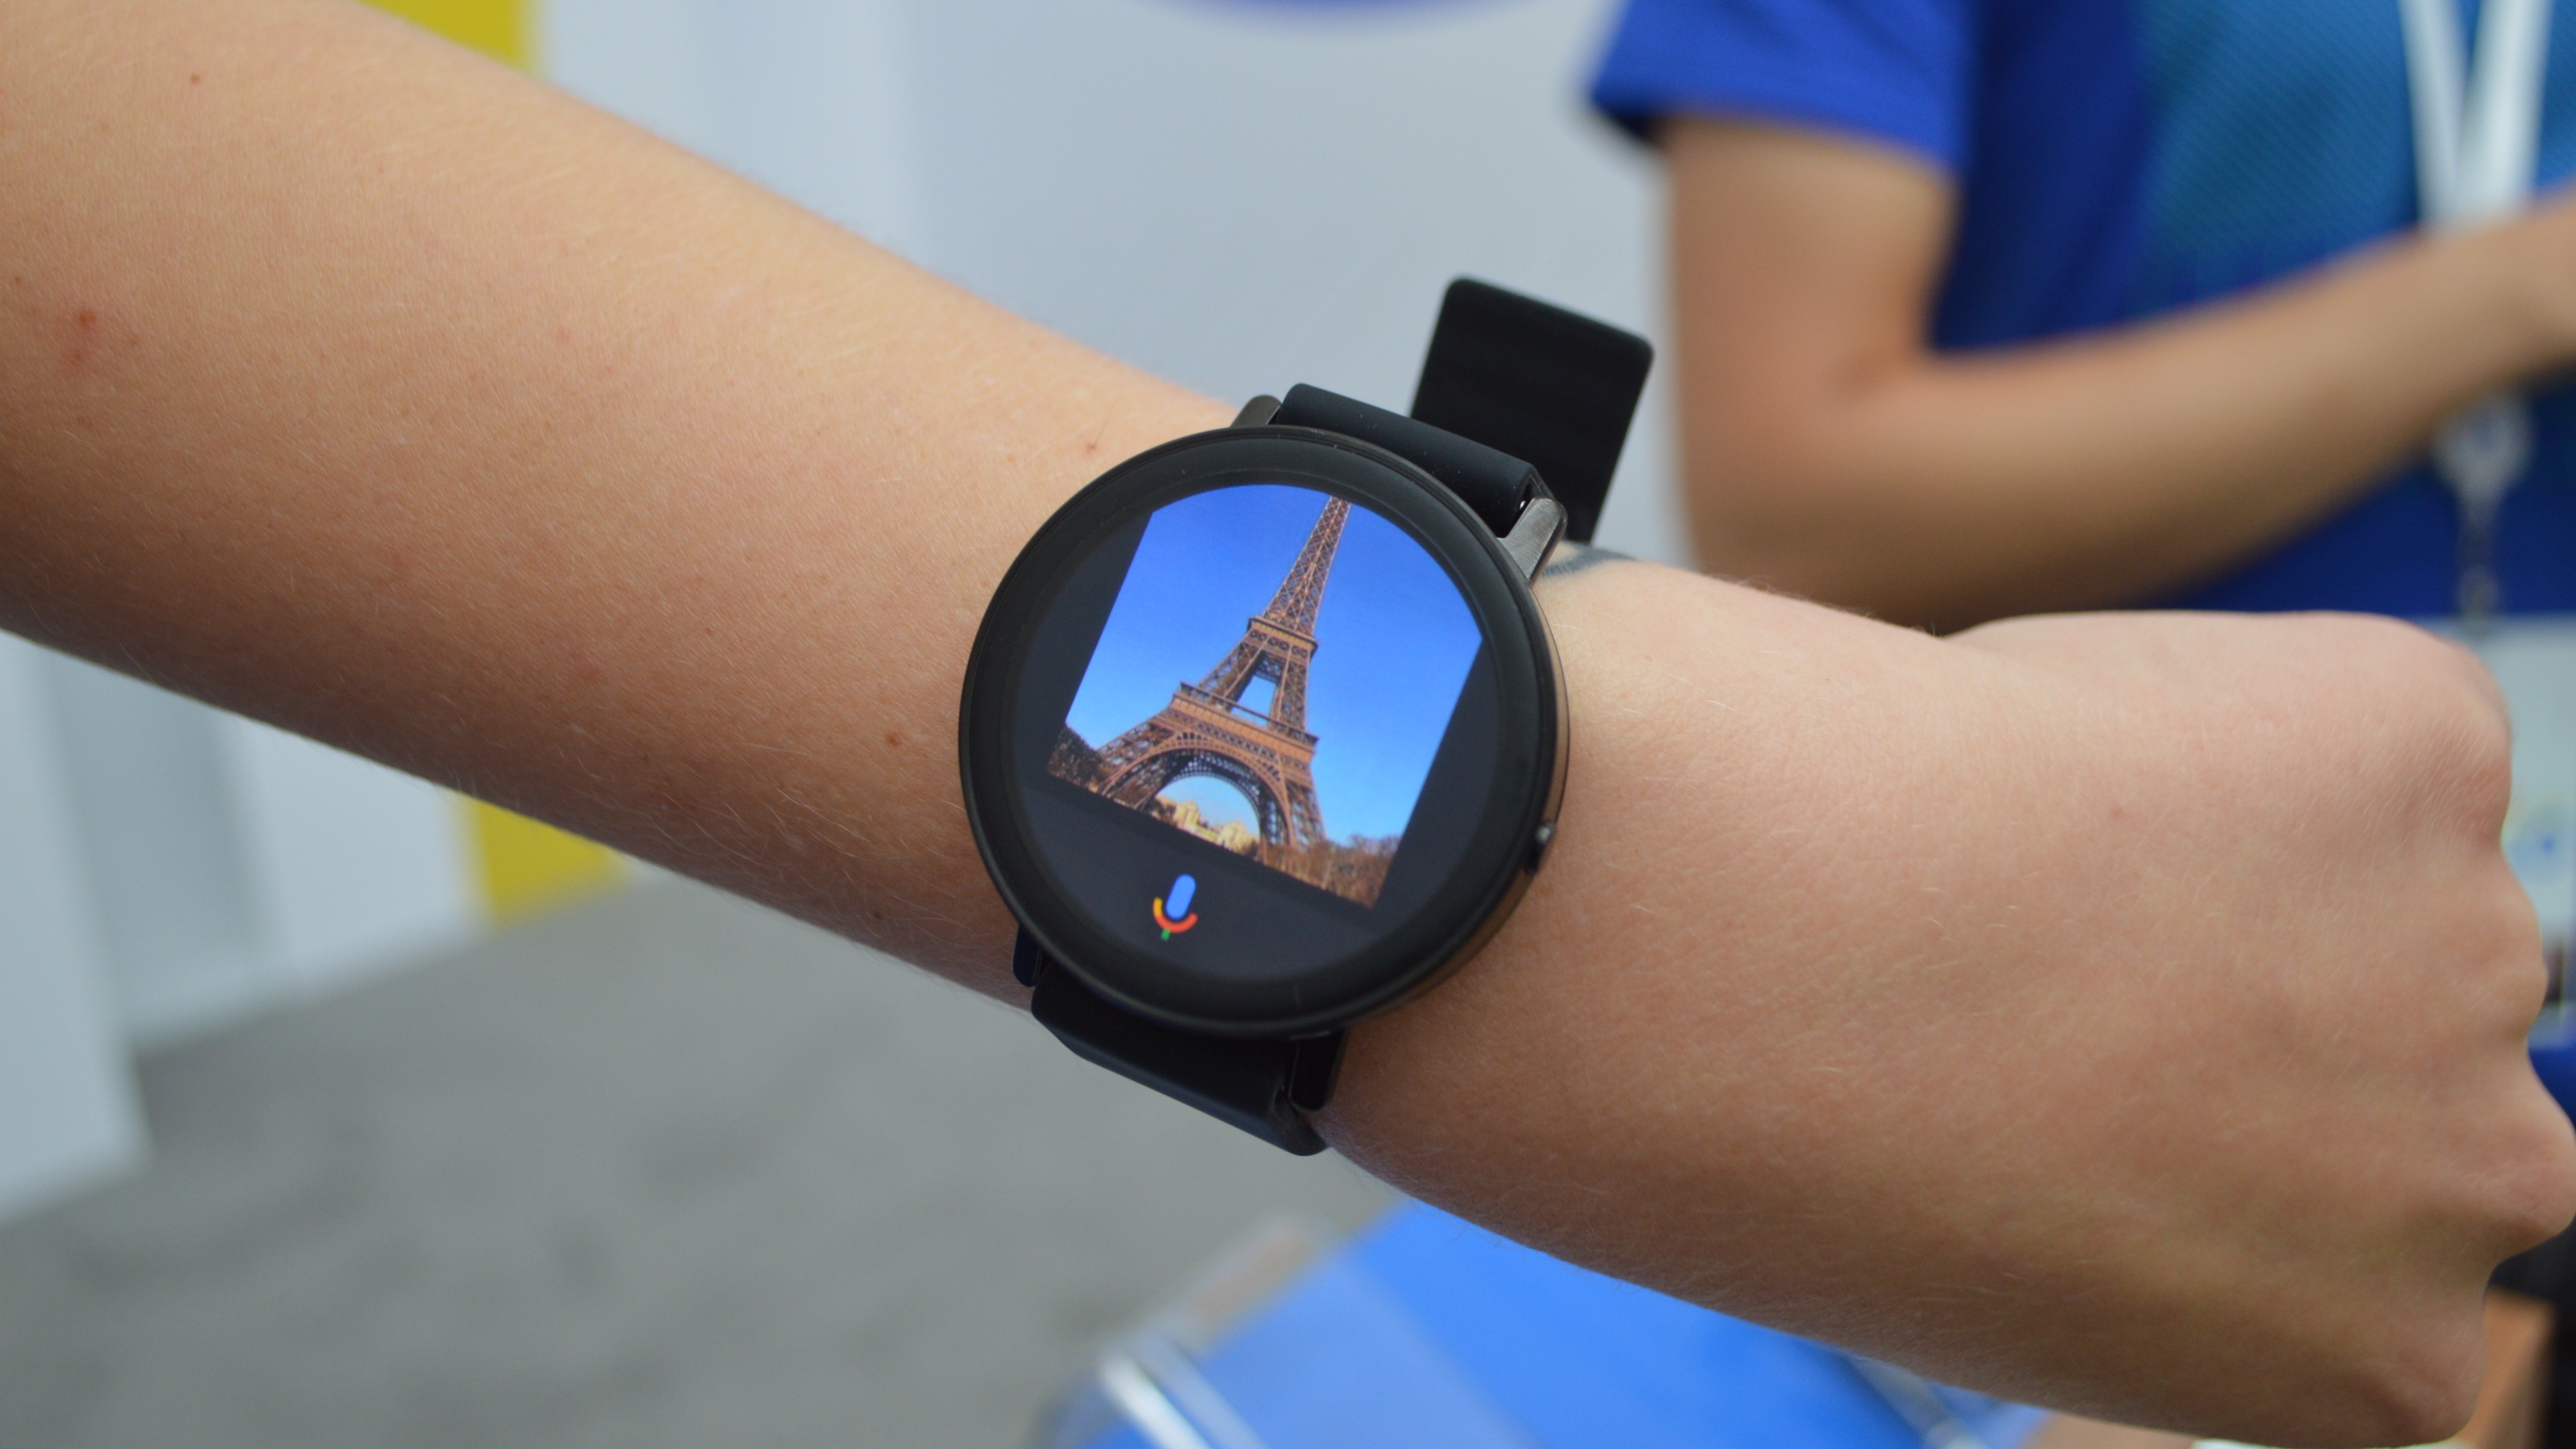 Google Pixel Watch to come with Qualcomm Snapdragon Wear 3100 Chipset